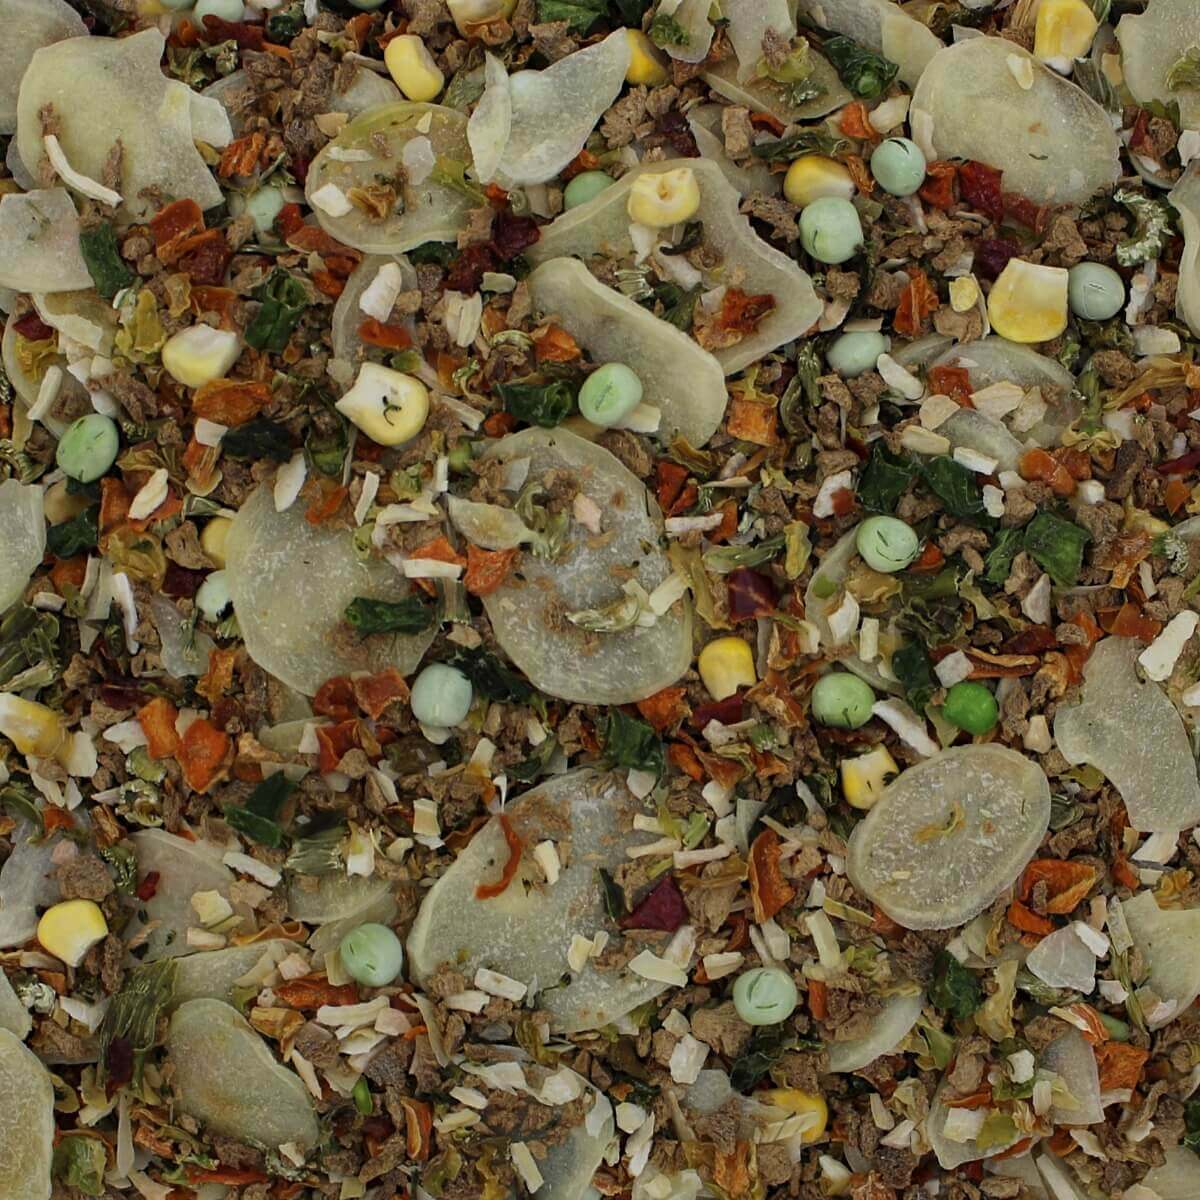 A close up of a mixture of seeds and nuts.